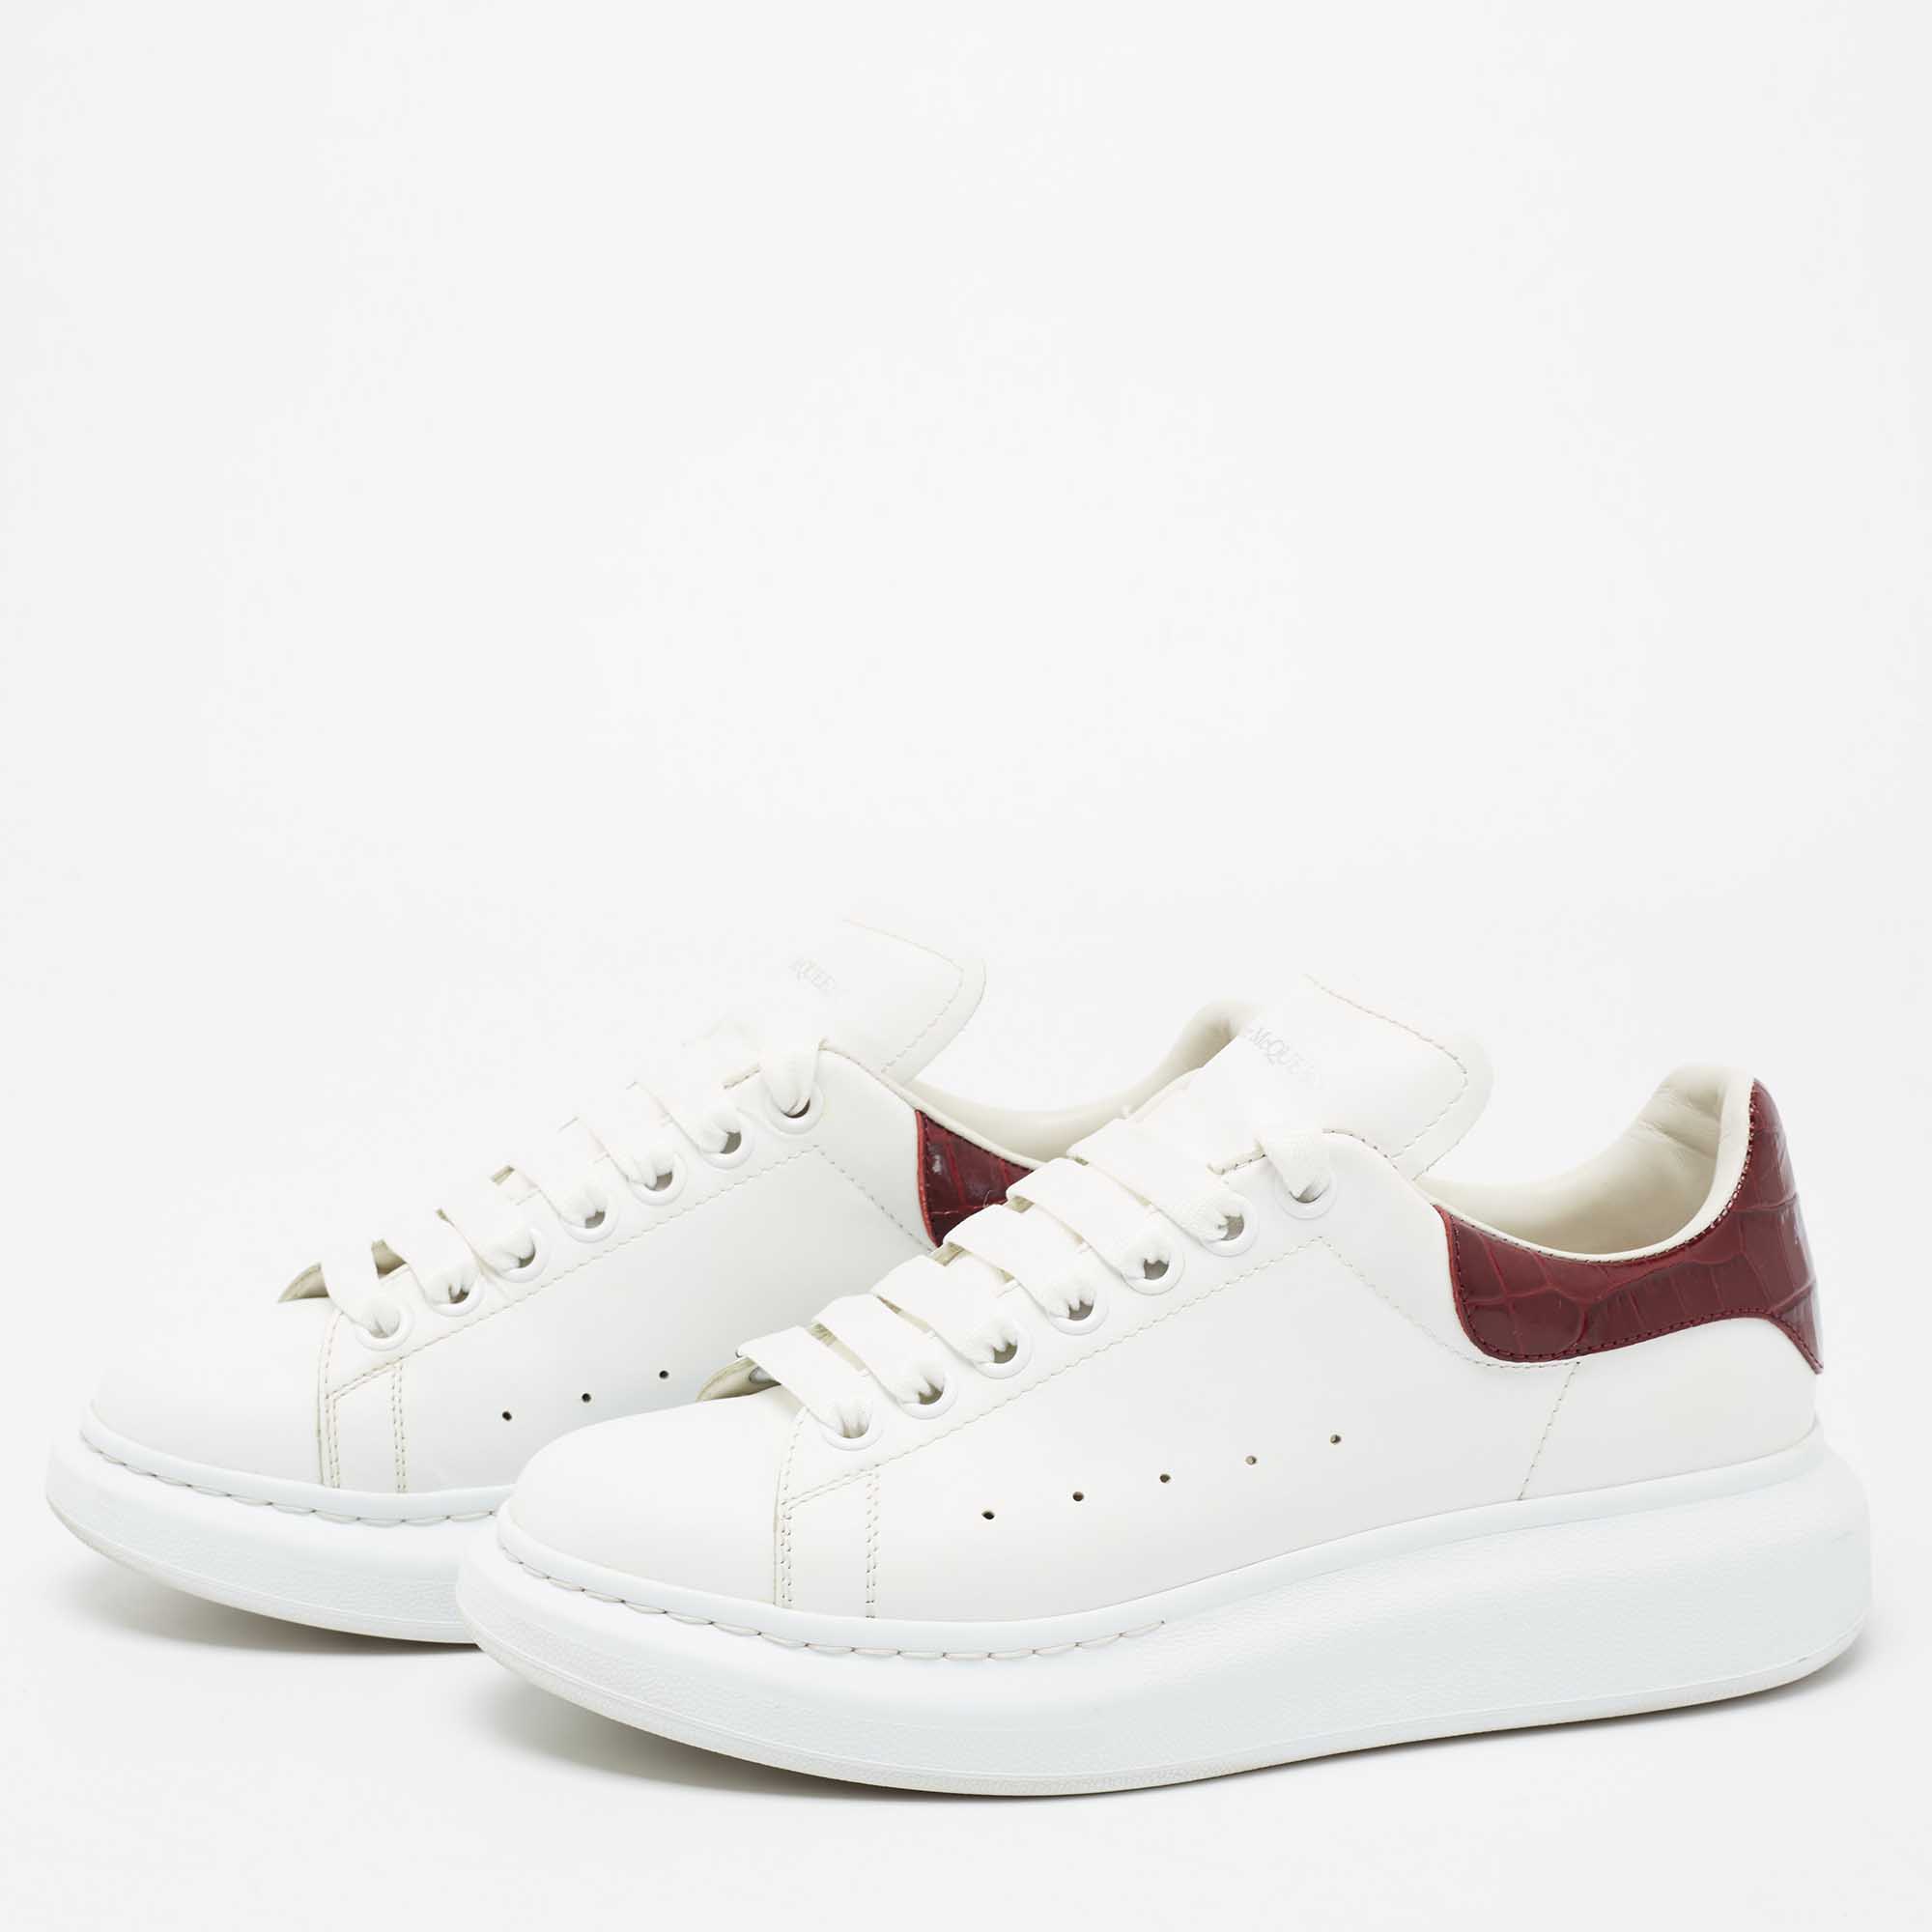 

Alexander McQueen White/Burgundy Croc Embossed Leather Larry Low Top Sneakers Size